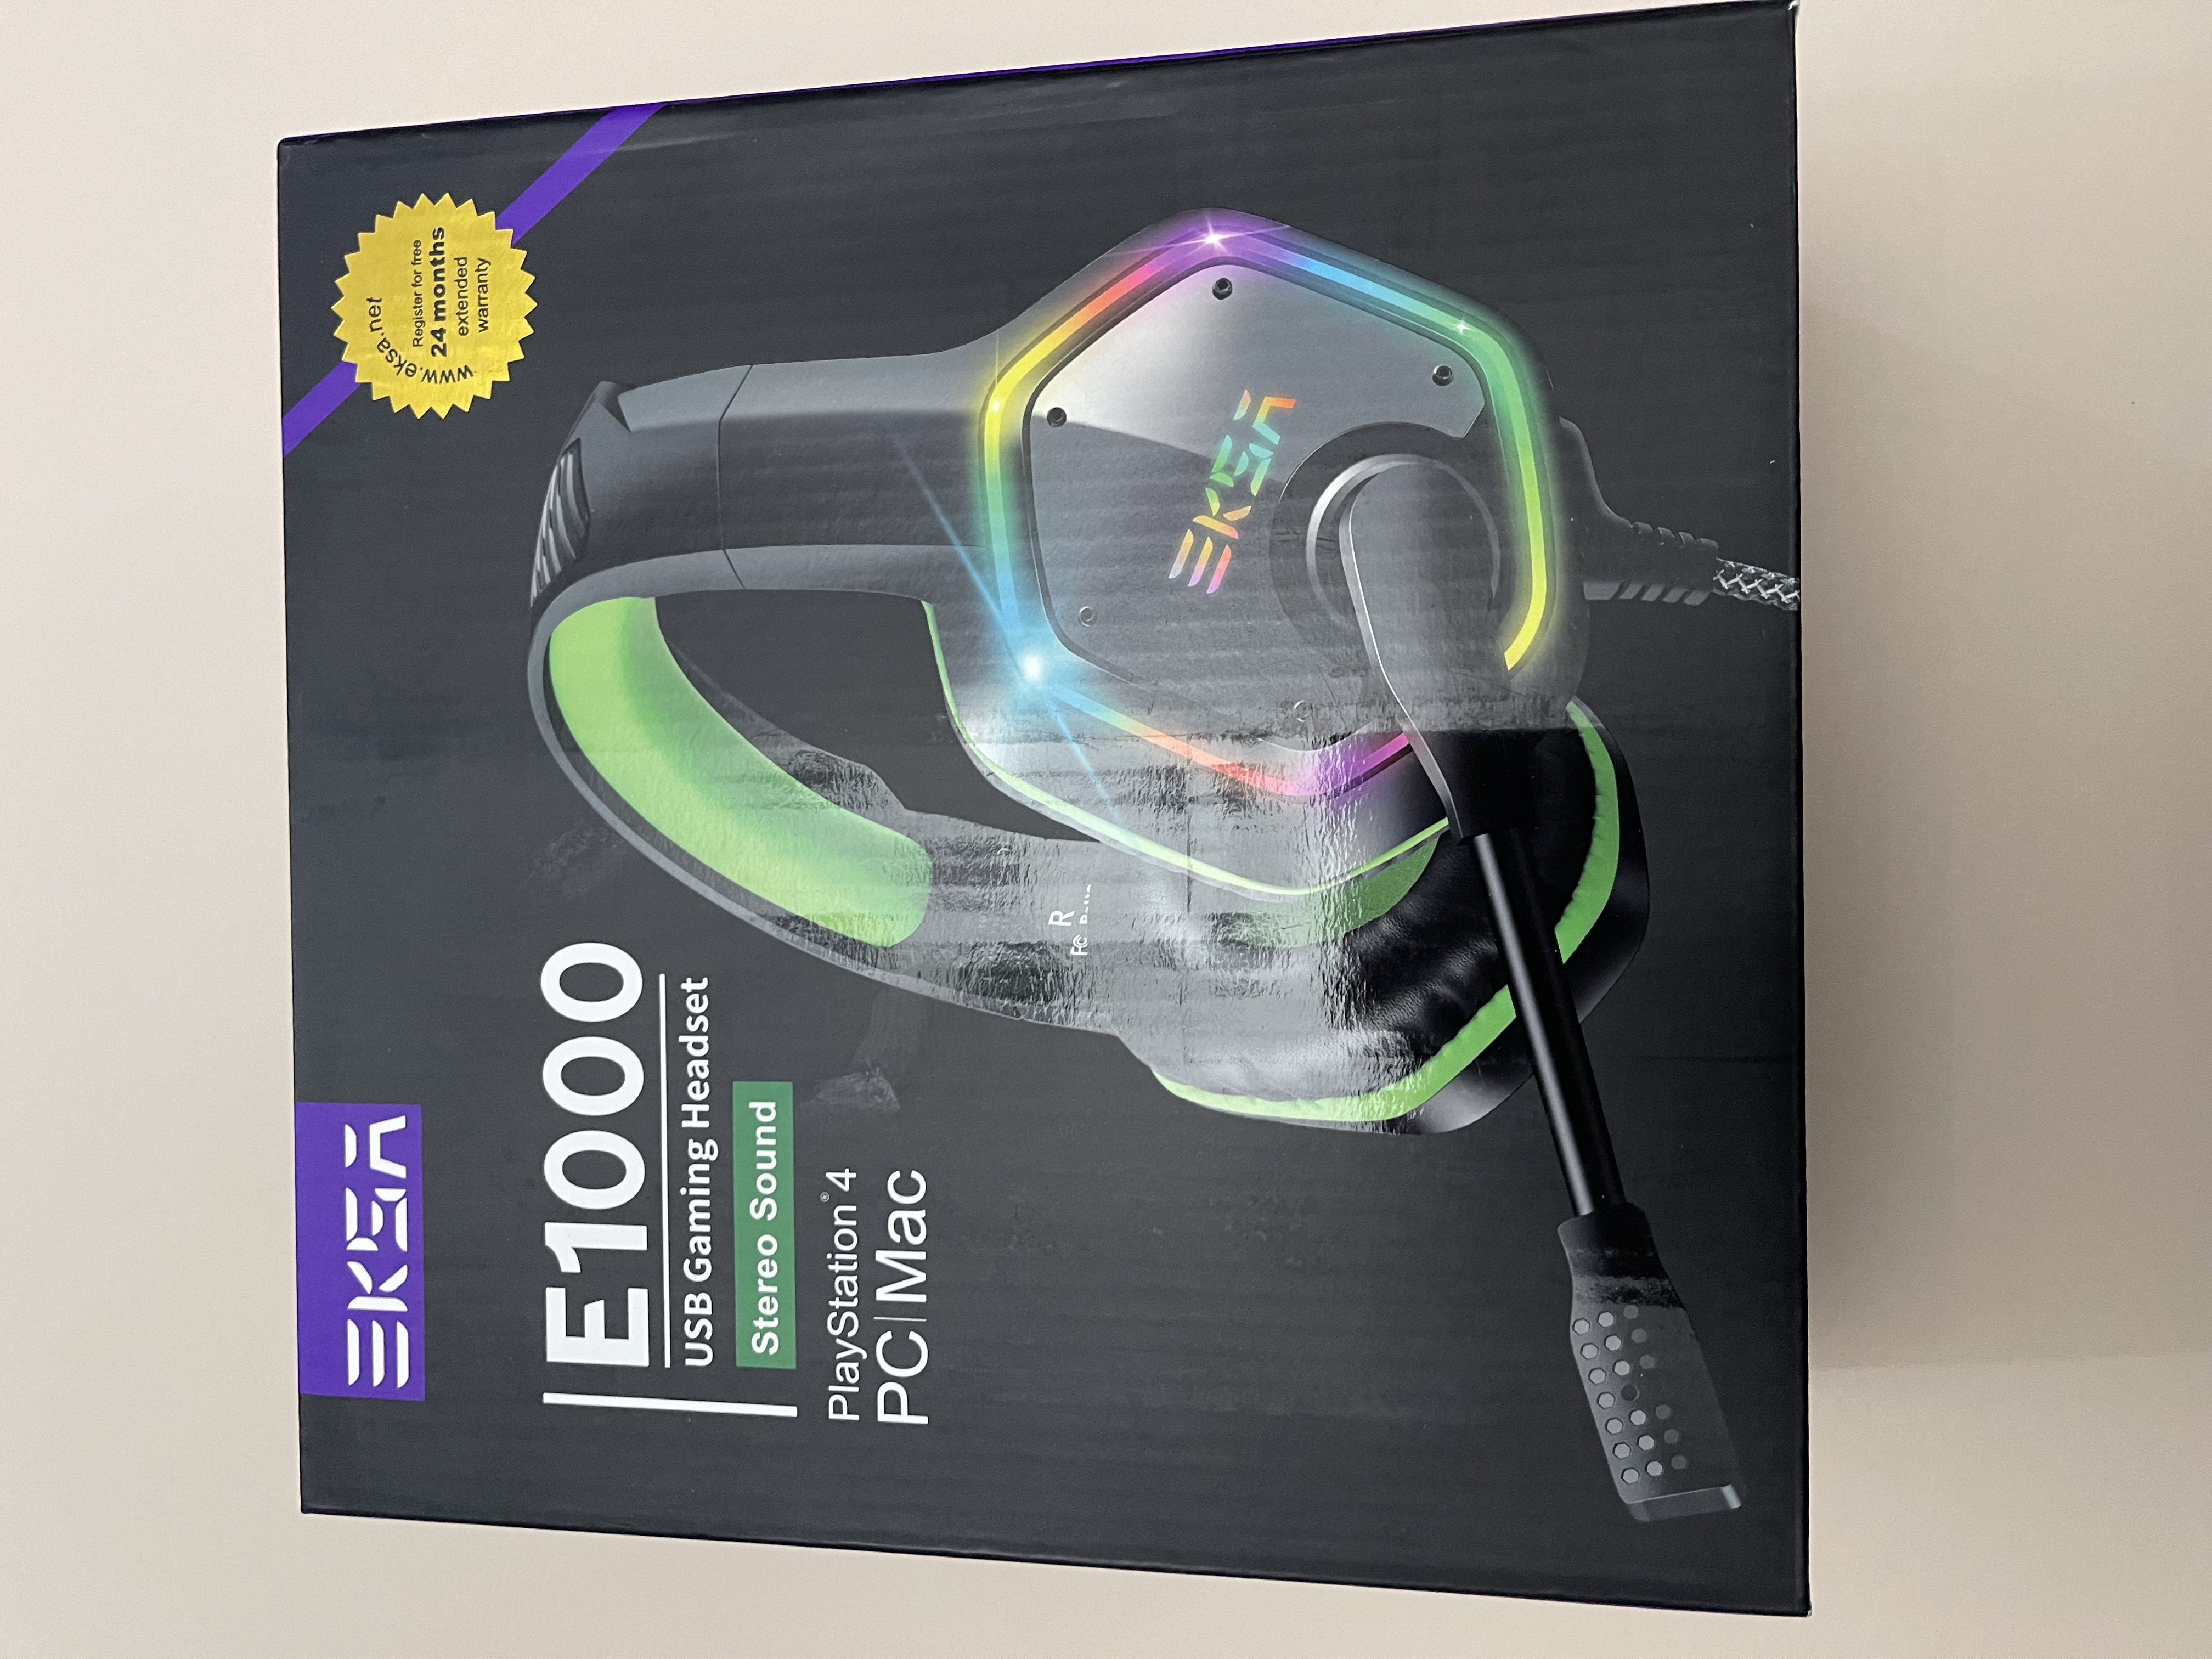 EKSA E1000 USB Gaming Headset for PC - Computer Headphones with Microphone/Mic Noise Cancelling, 7.1 Surround Sound Wired Headset & RGB Light